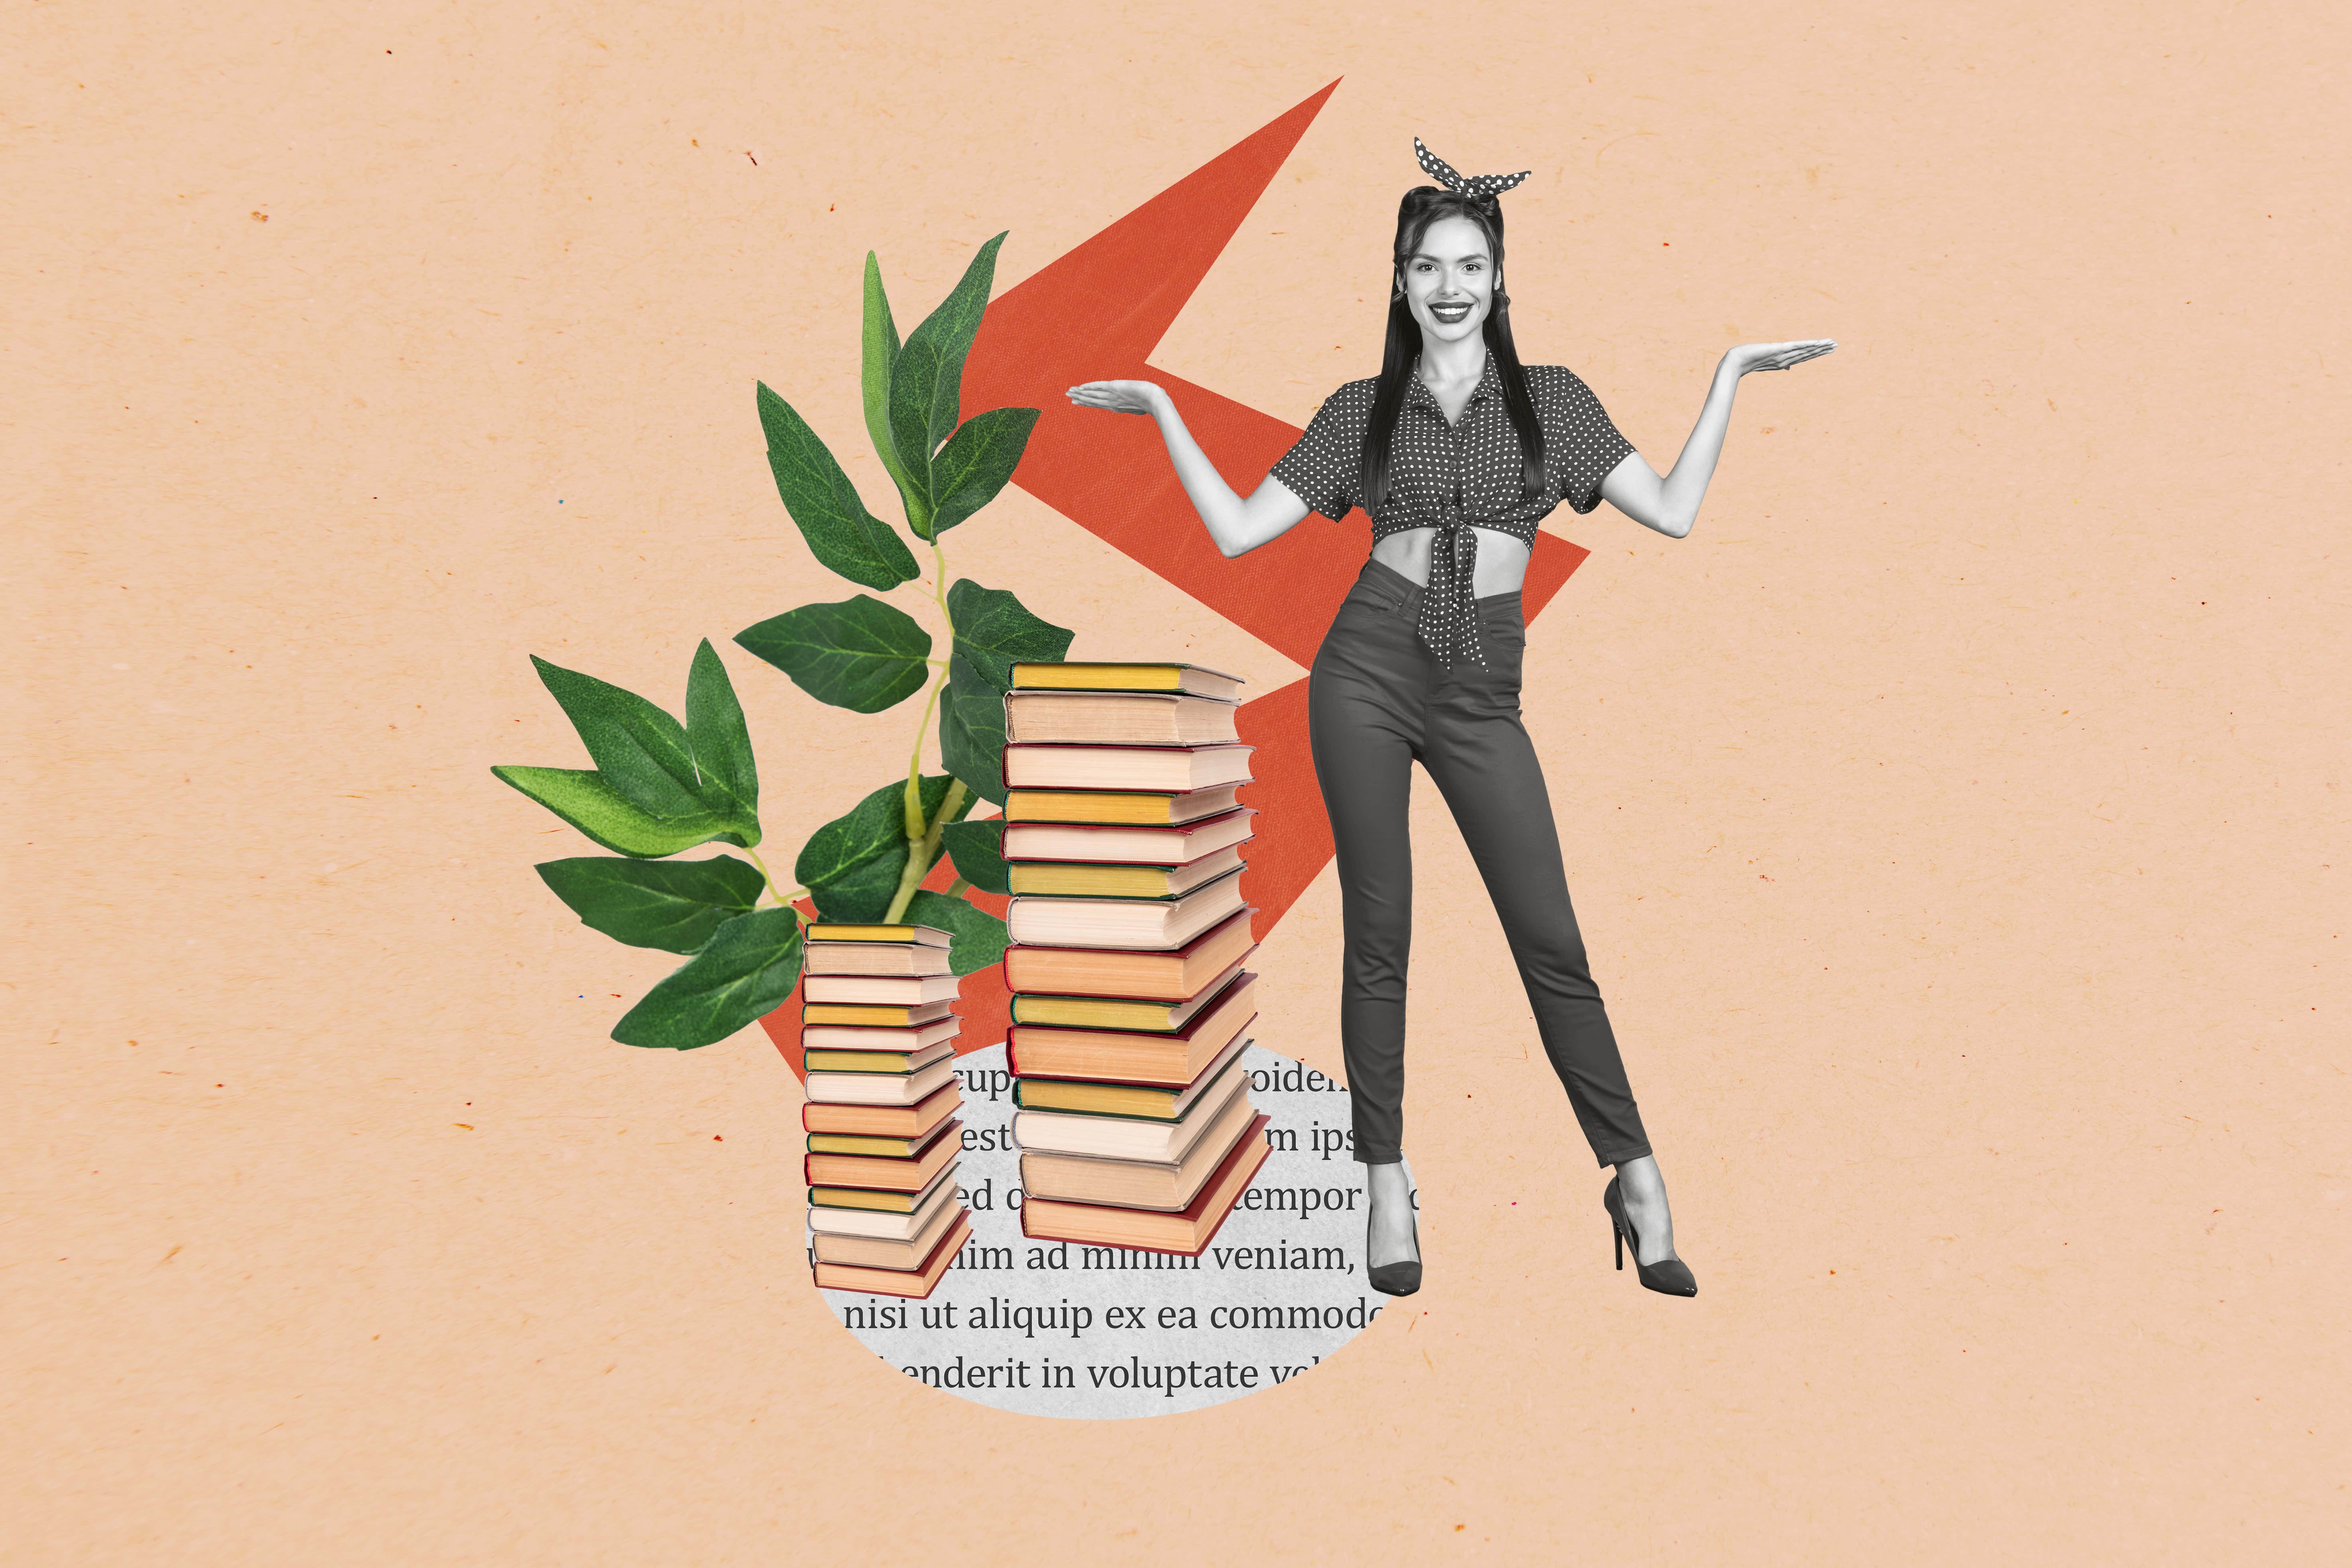 An illustration of a woman standing next to a stack of garden books.